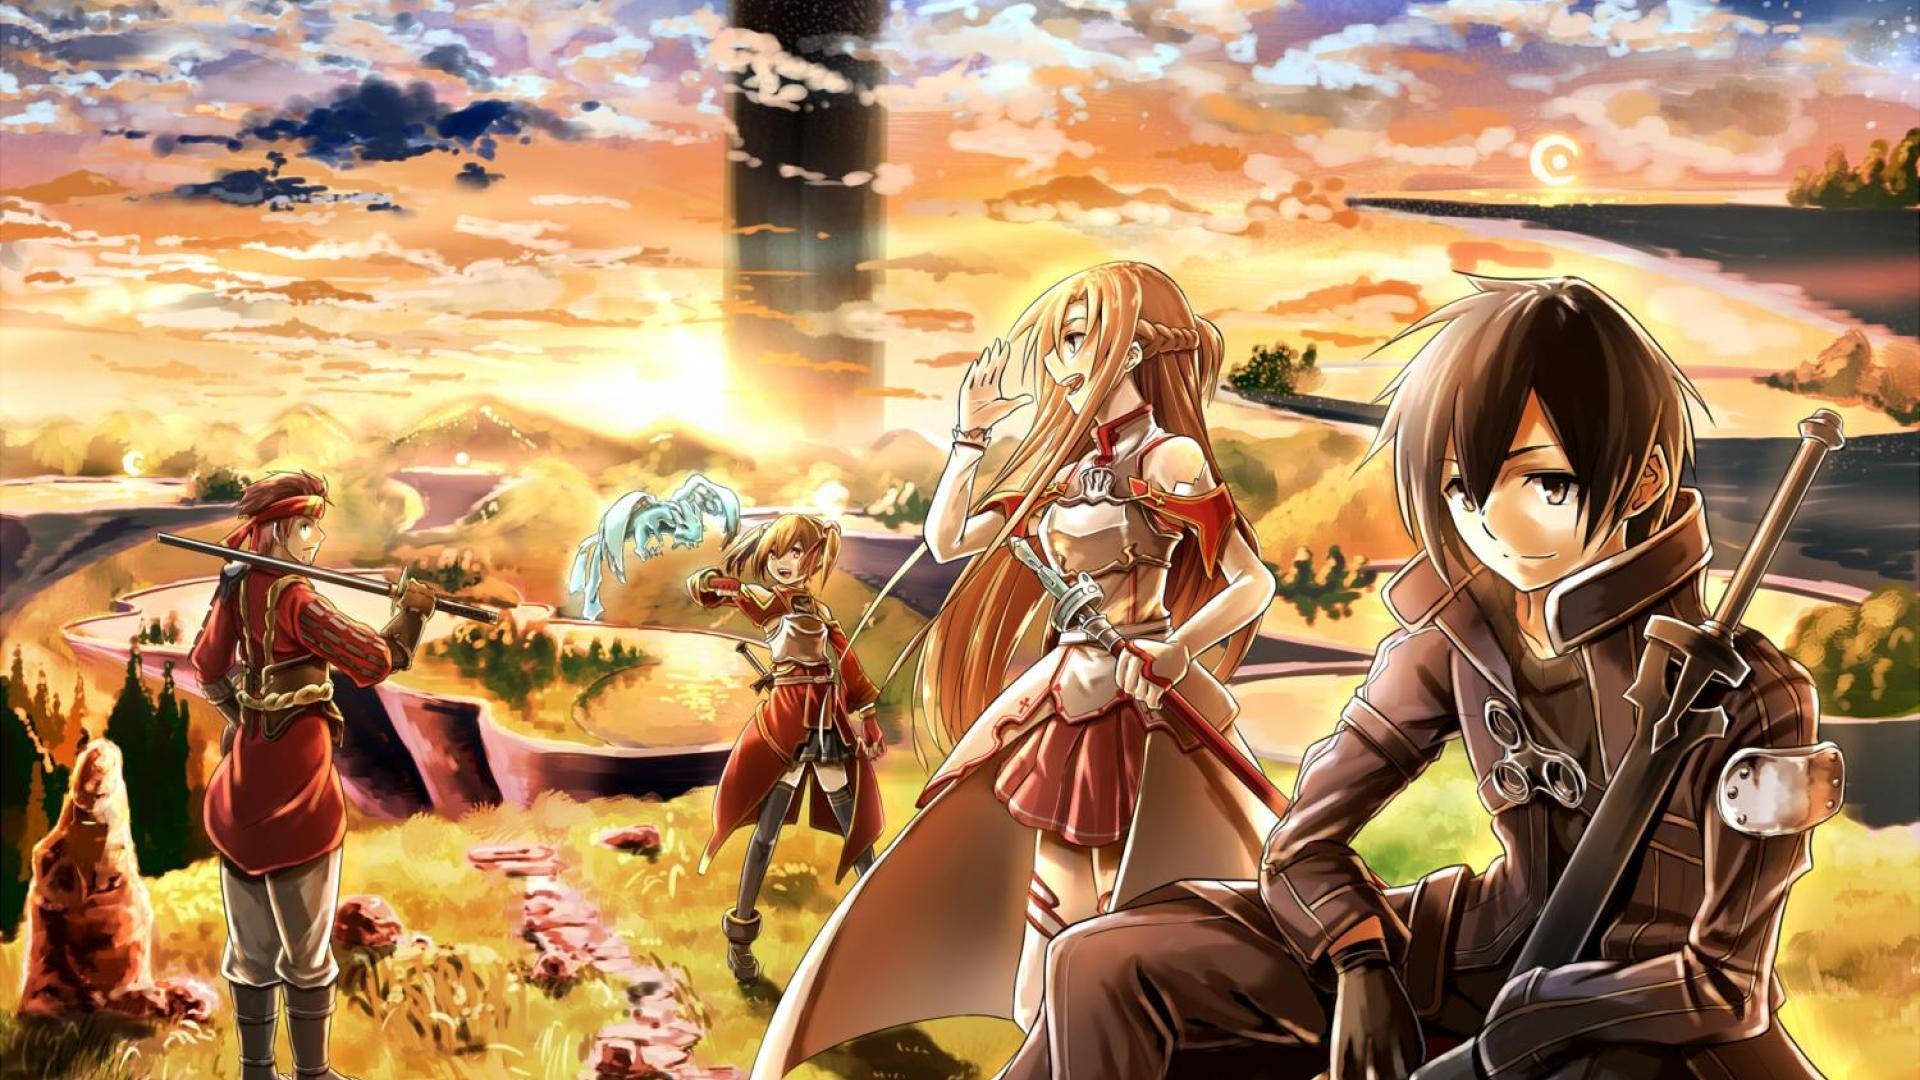 A warm evening of pure enchantment awaits in the mystical land of Sao. Wallpaper